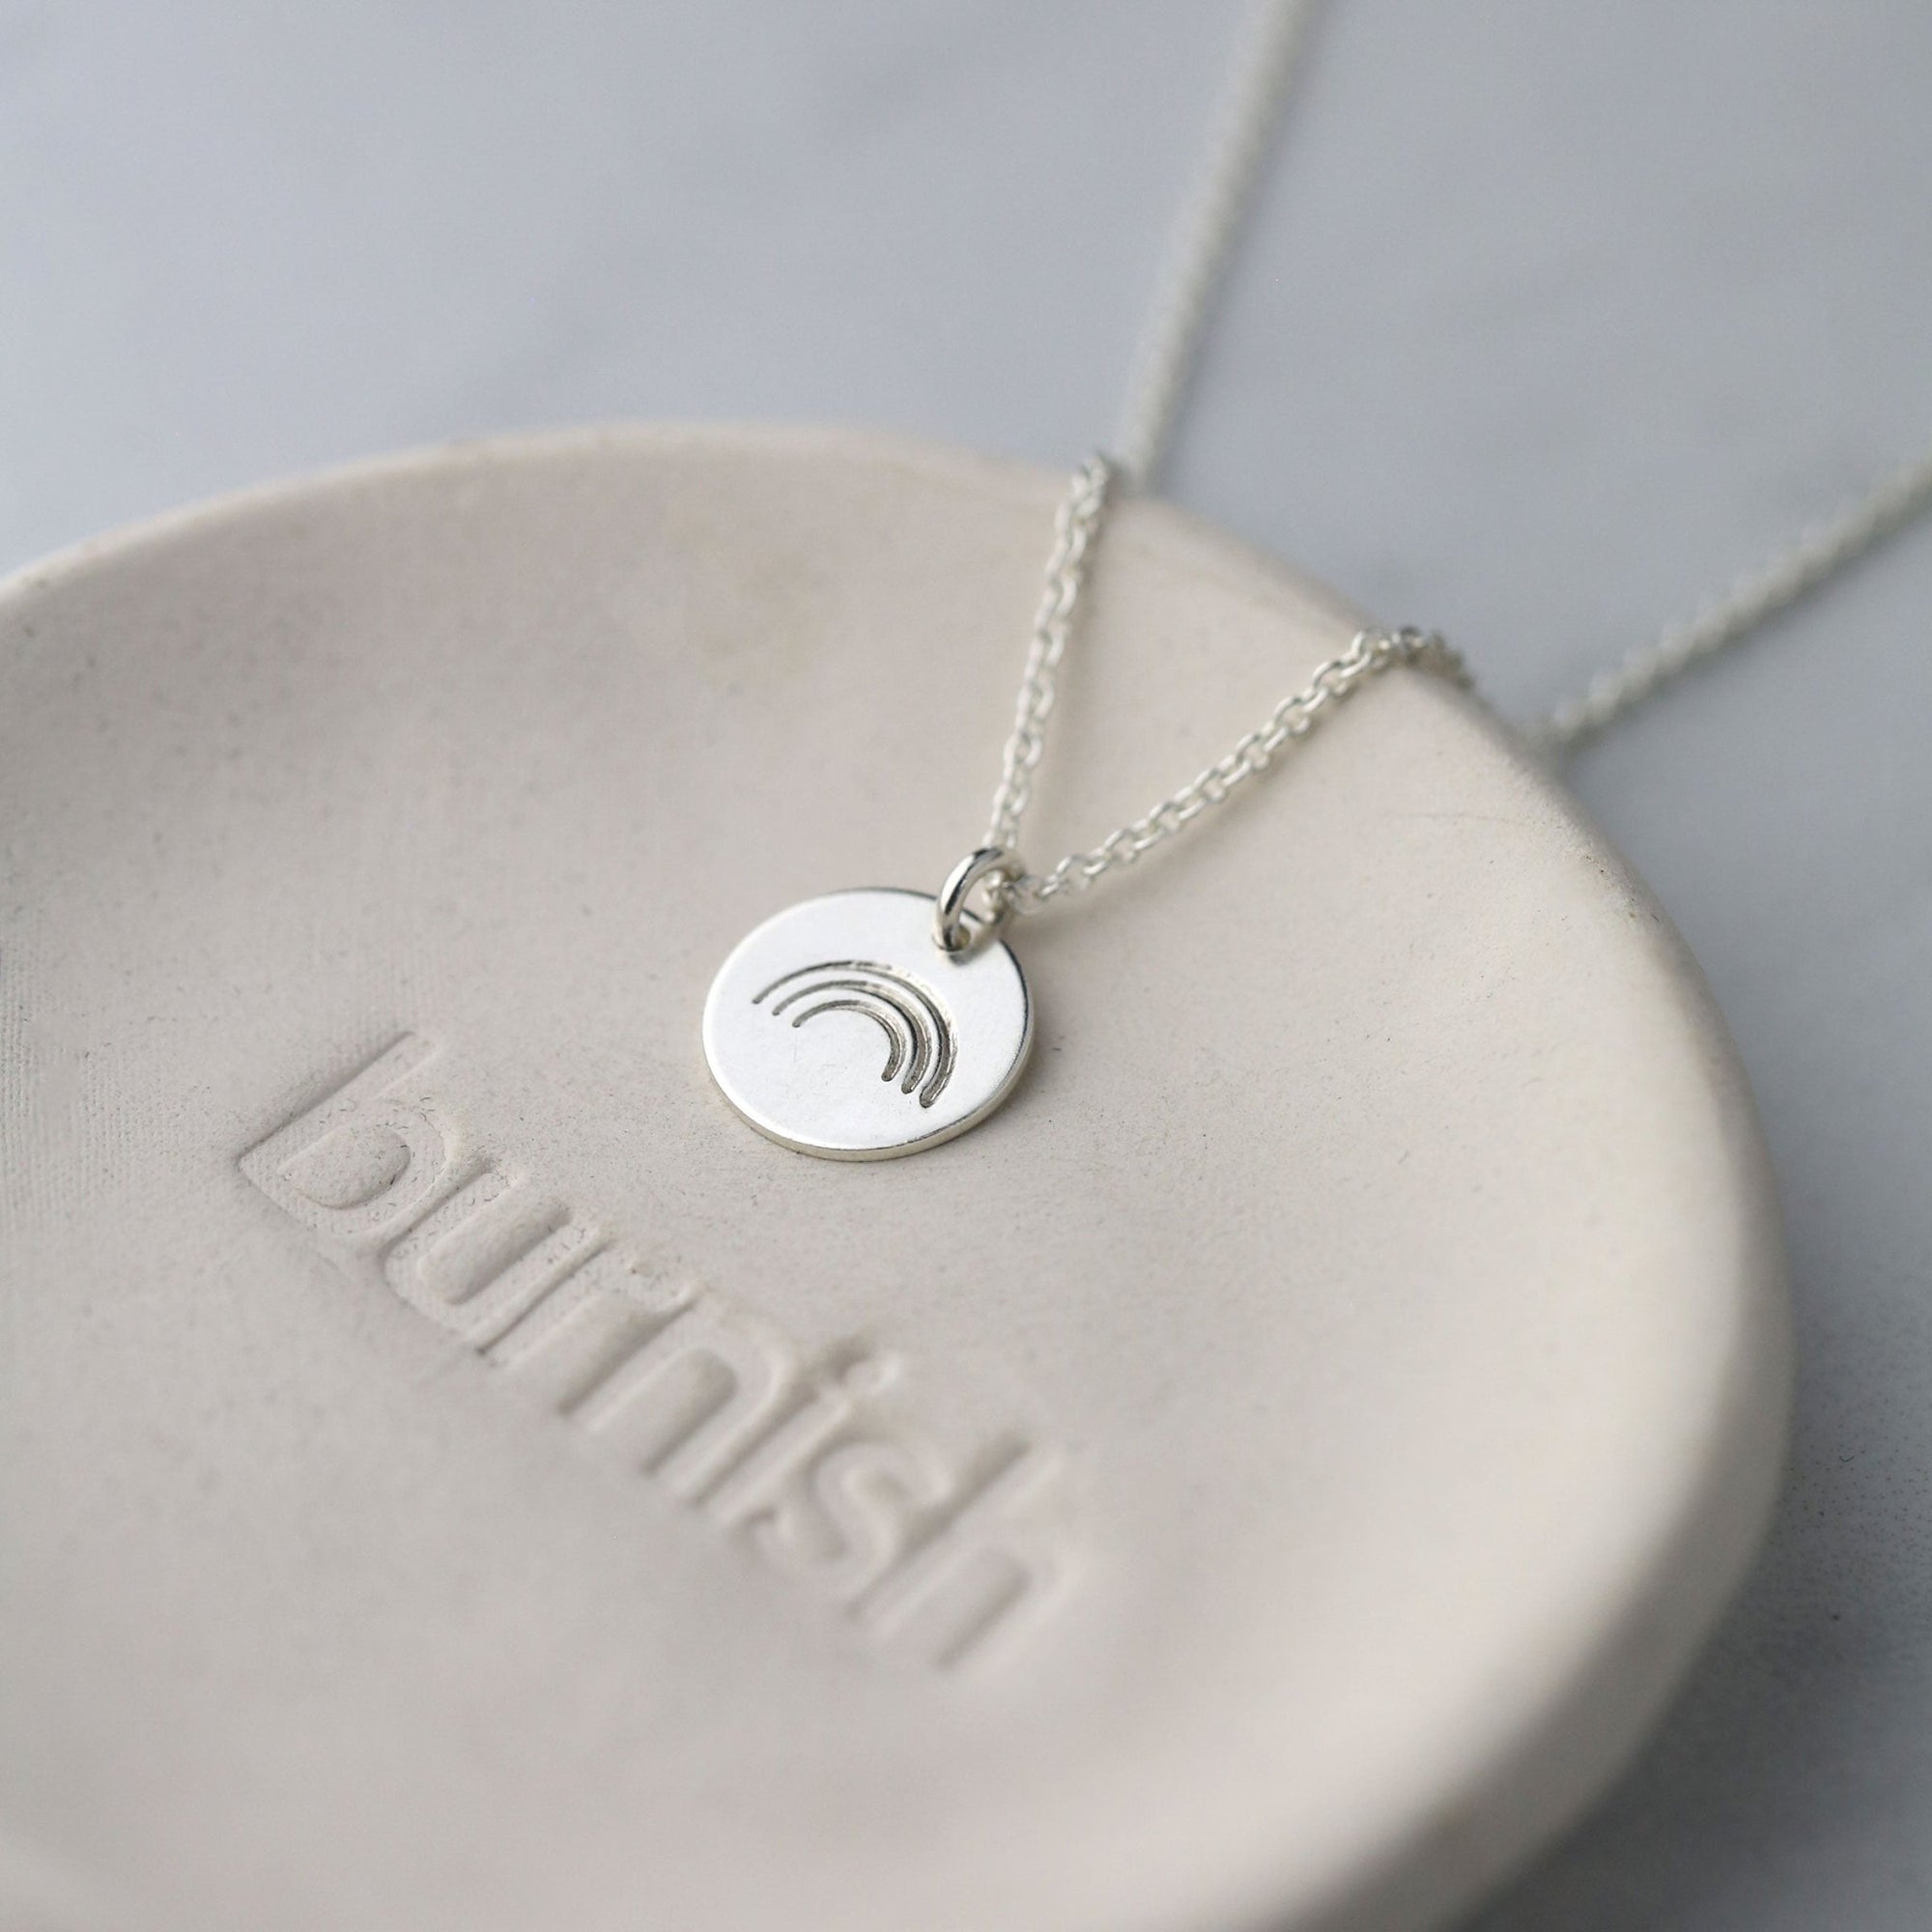 Hand Stamped Rainbow Necklace handmade by Burnish